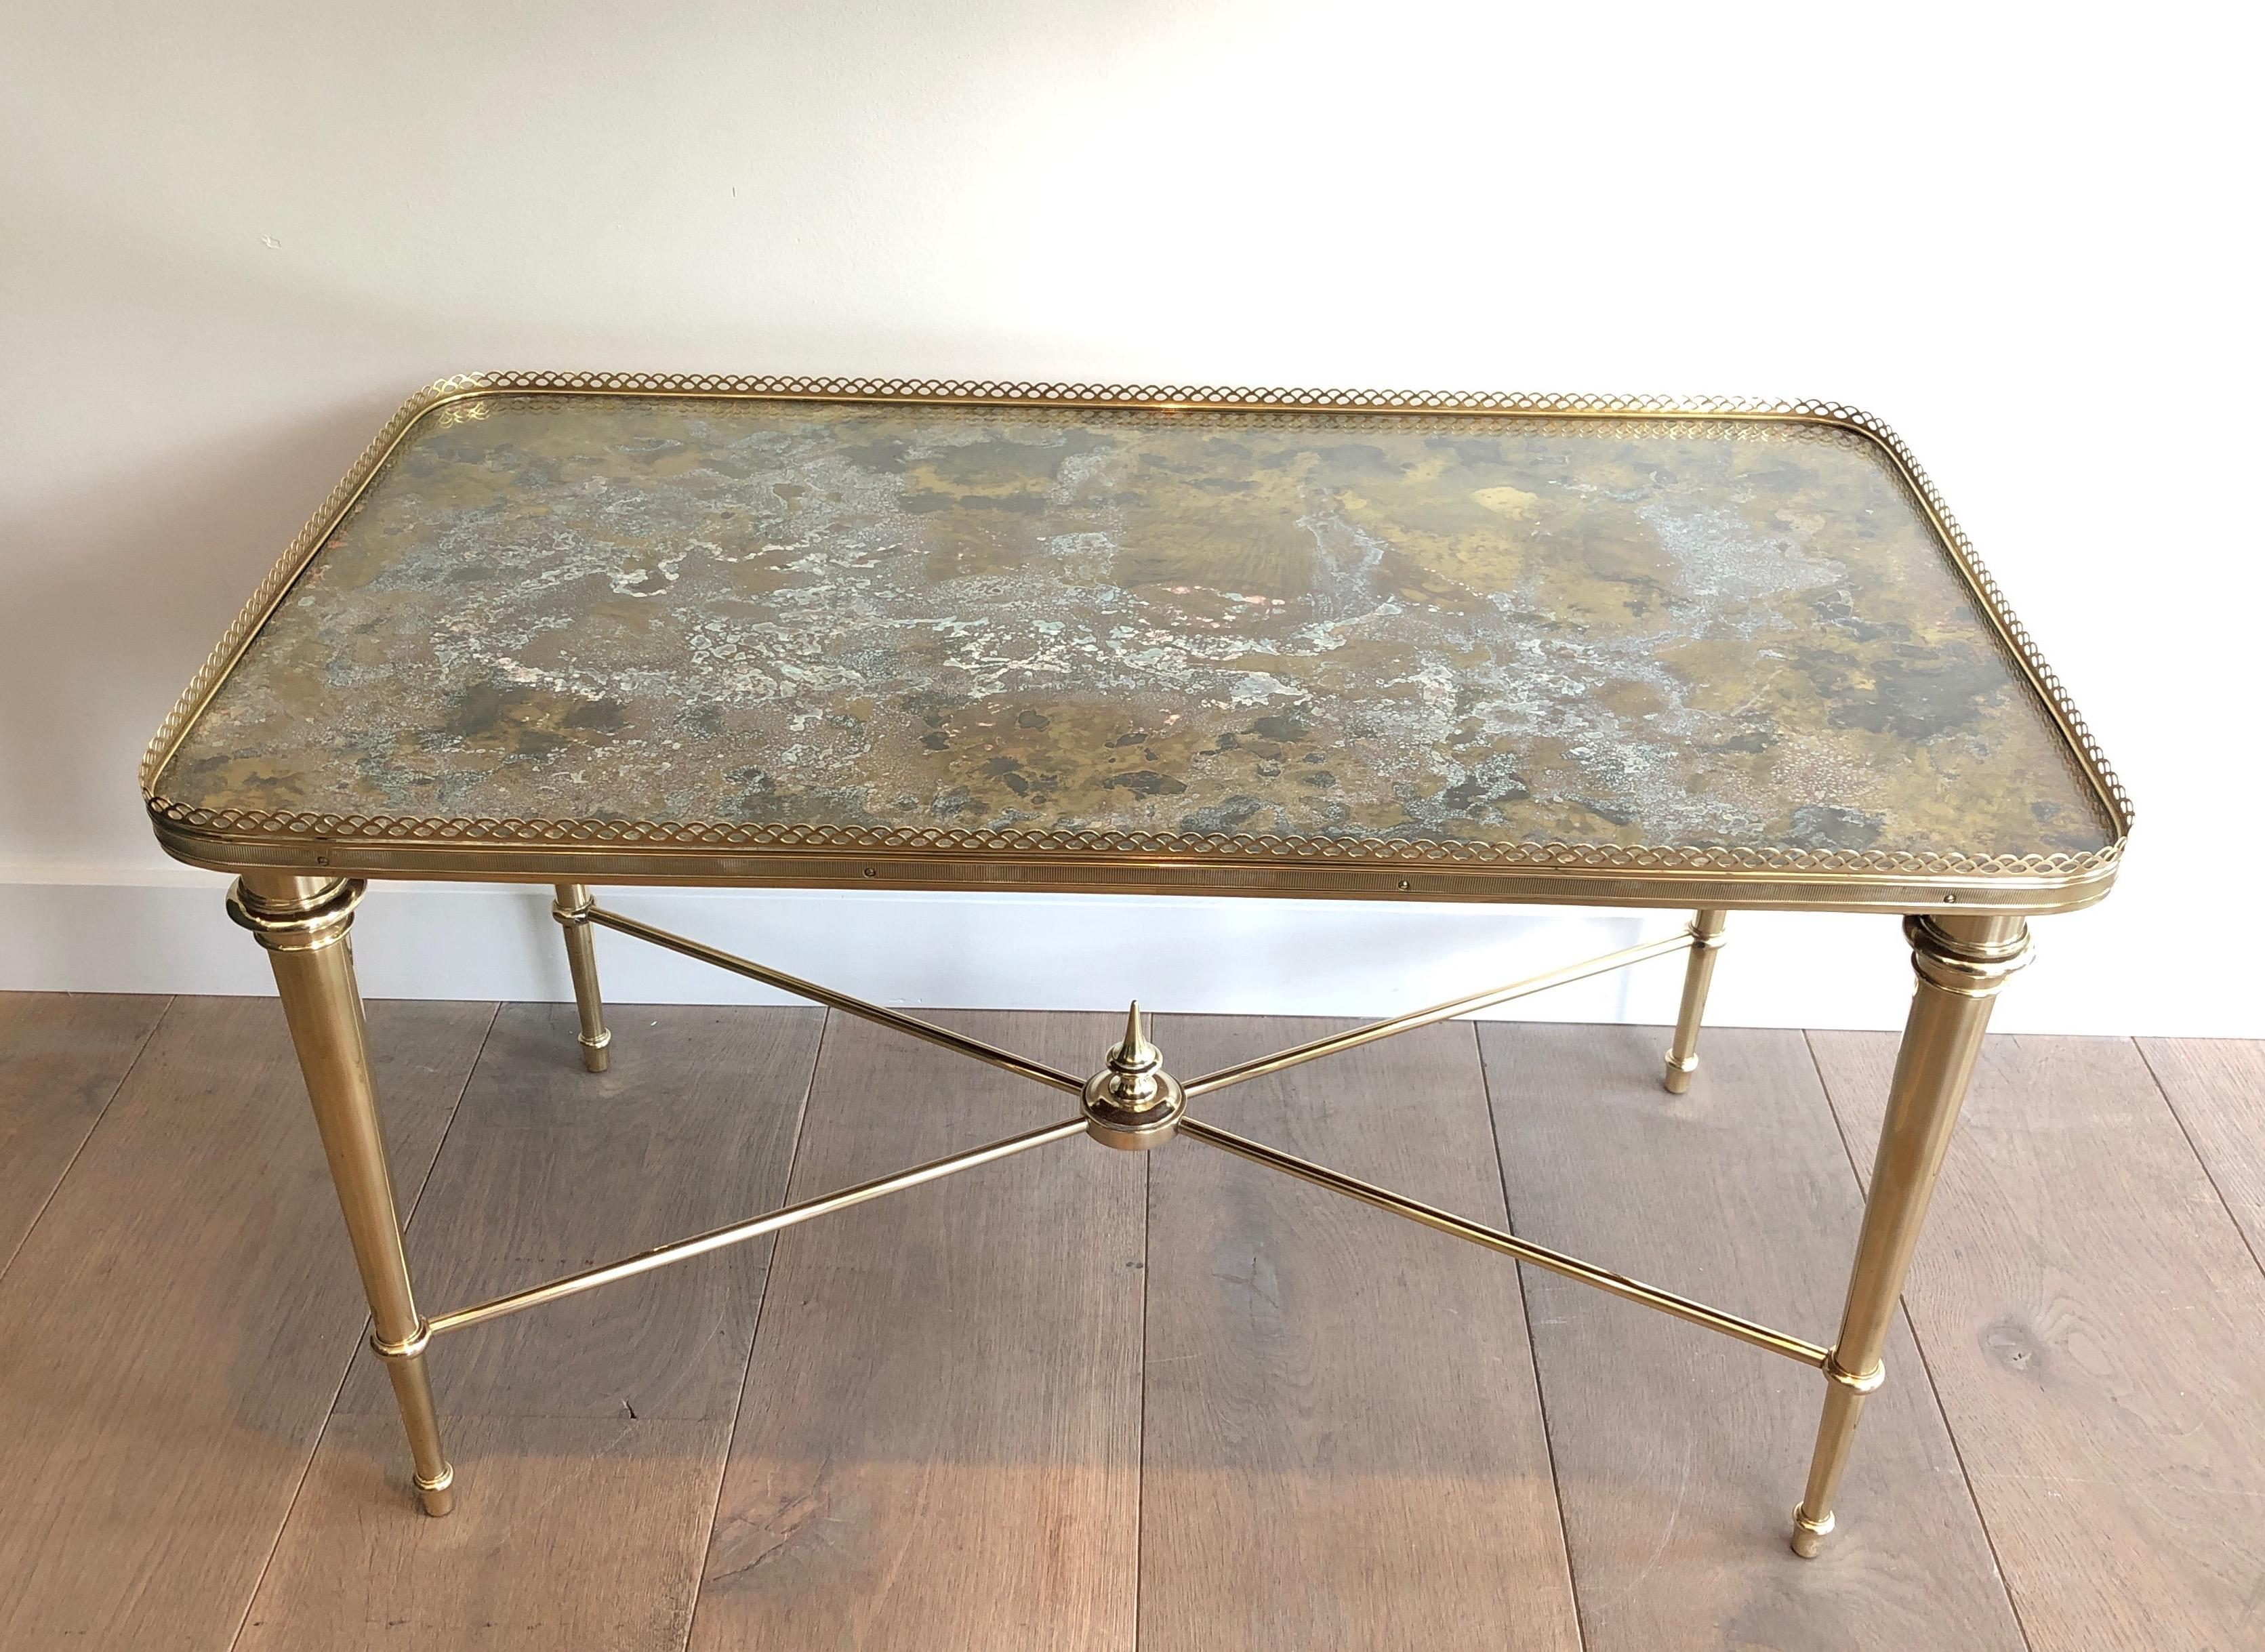 This coffee table is made of brass with an oxidized and patinated brass top with glass on top. This is a French work by famous Maison Ramsay. The table is marked underneath. Circa 1940.